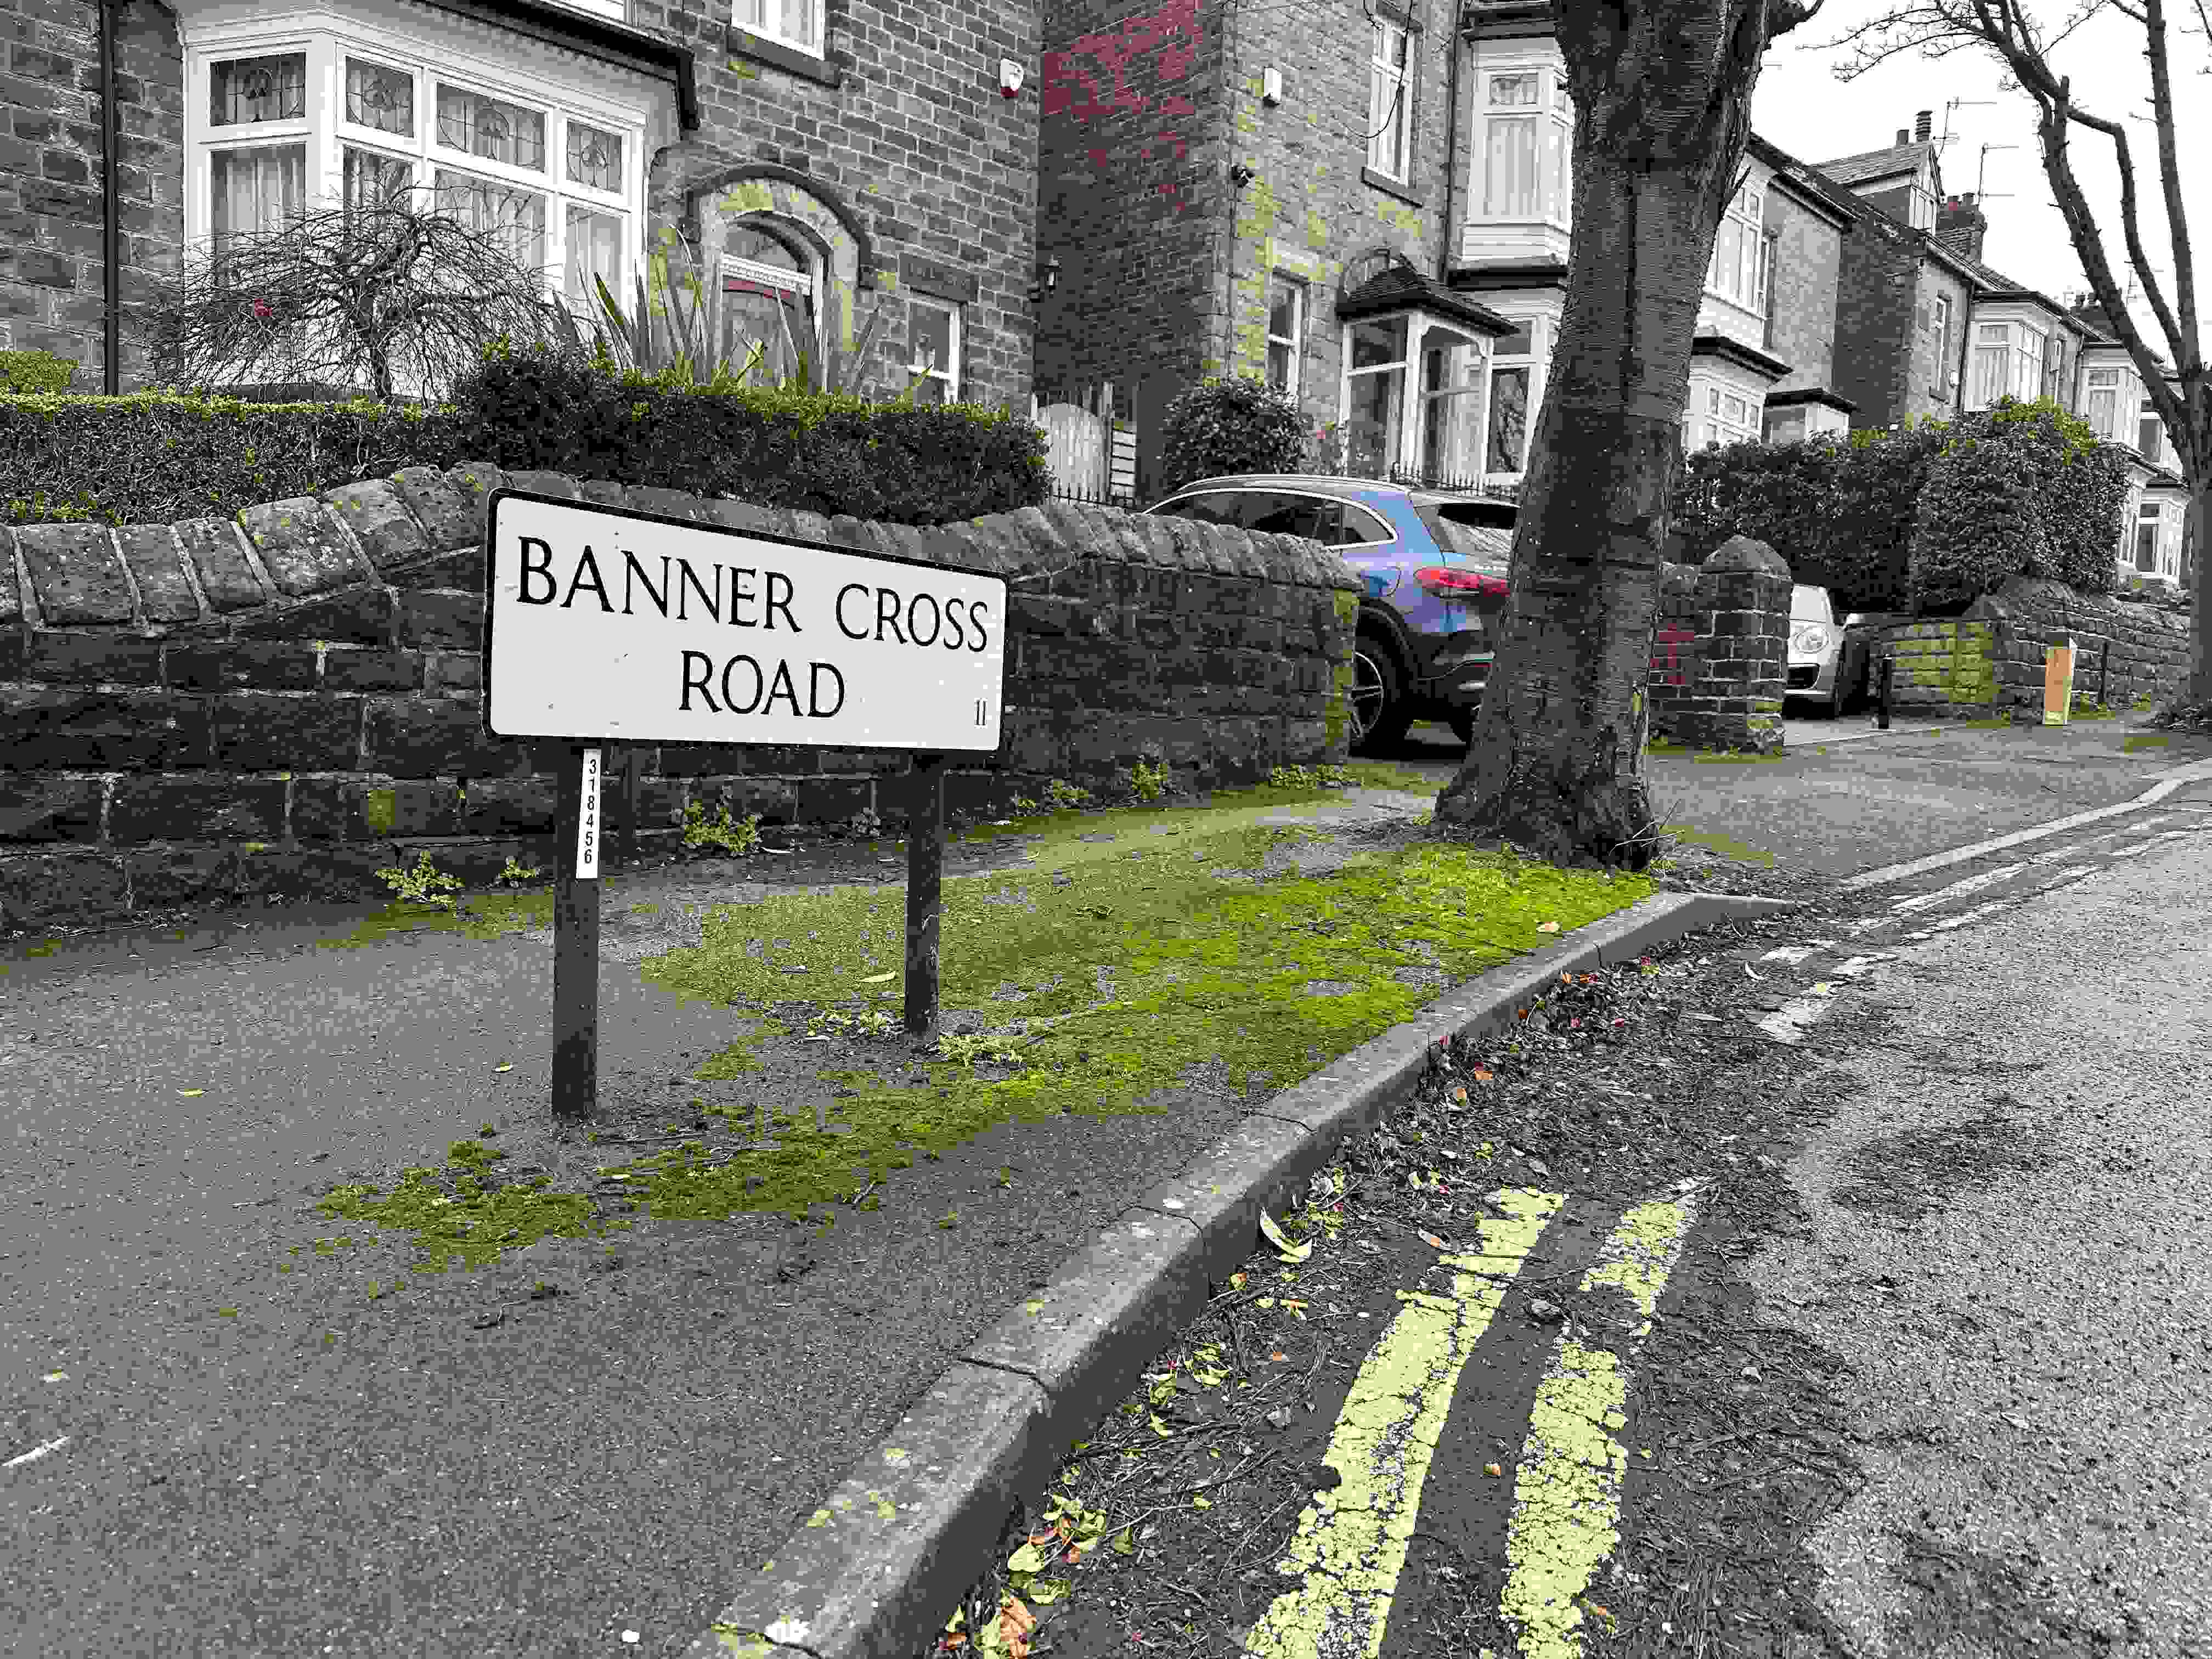 Banner Cross Road street sign stands beside a street tree and residential properties